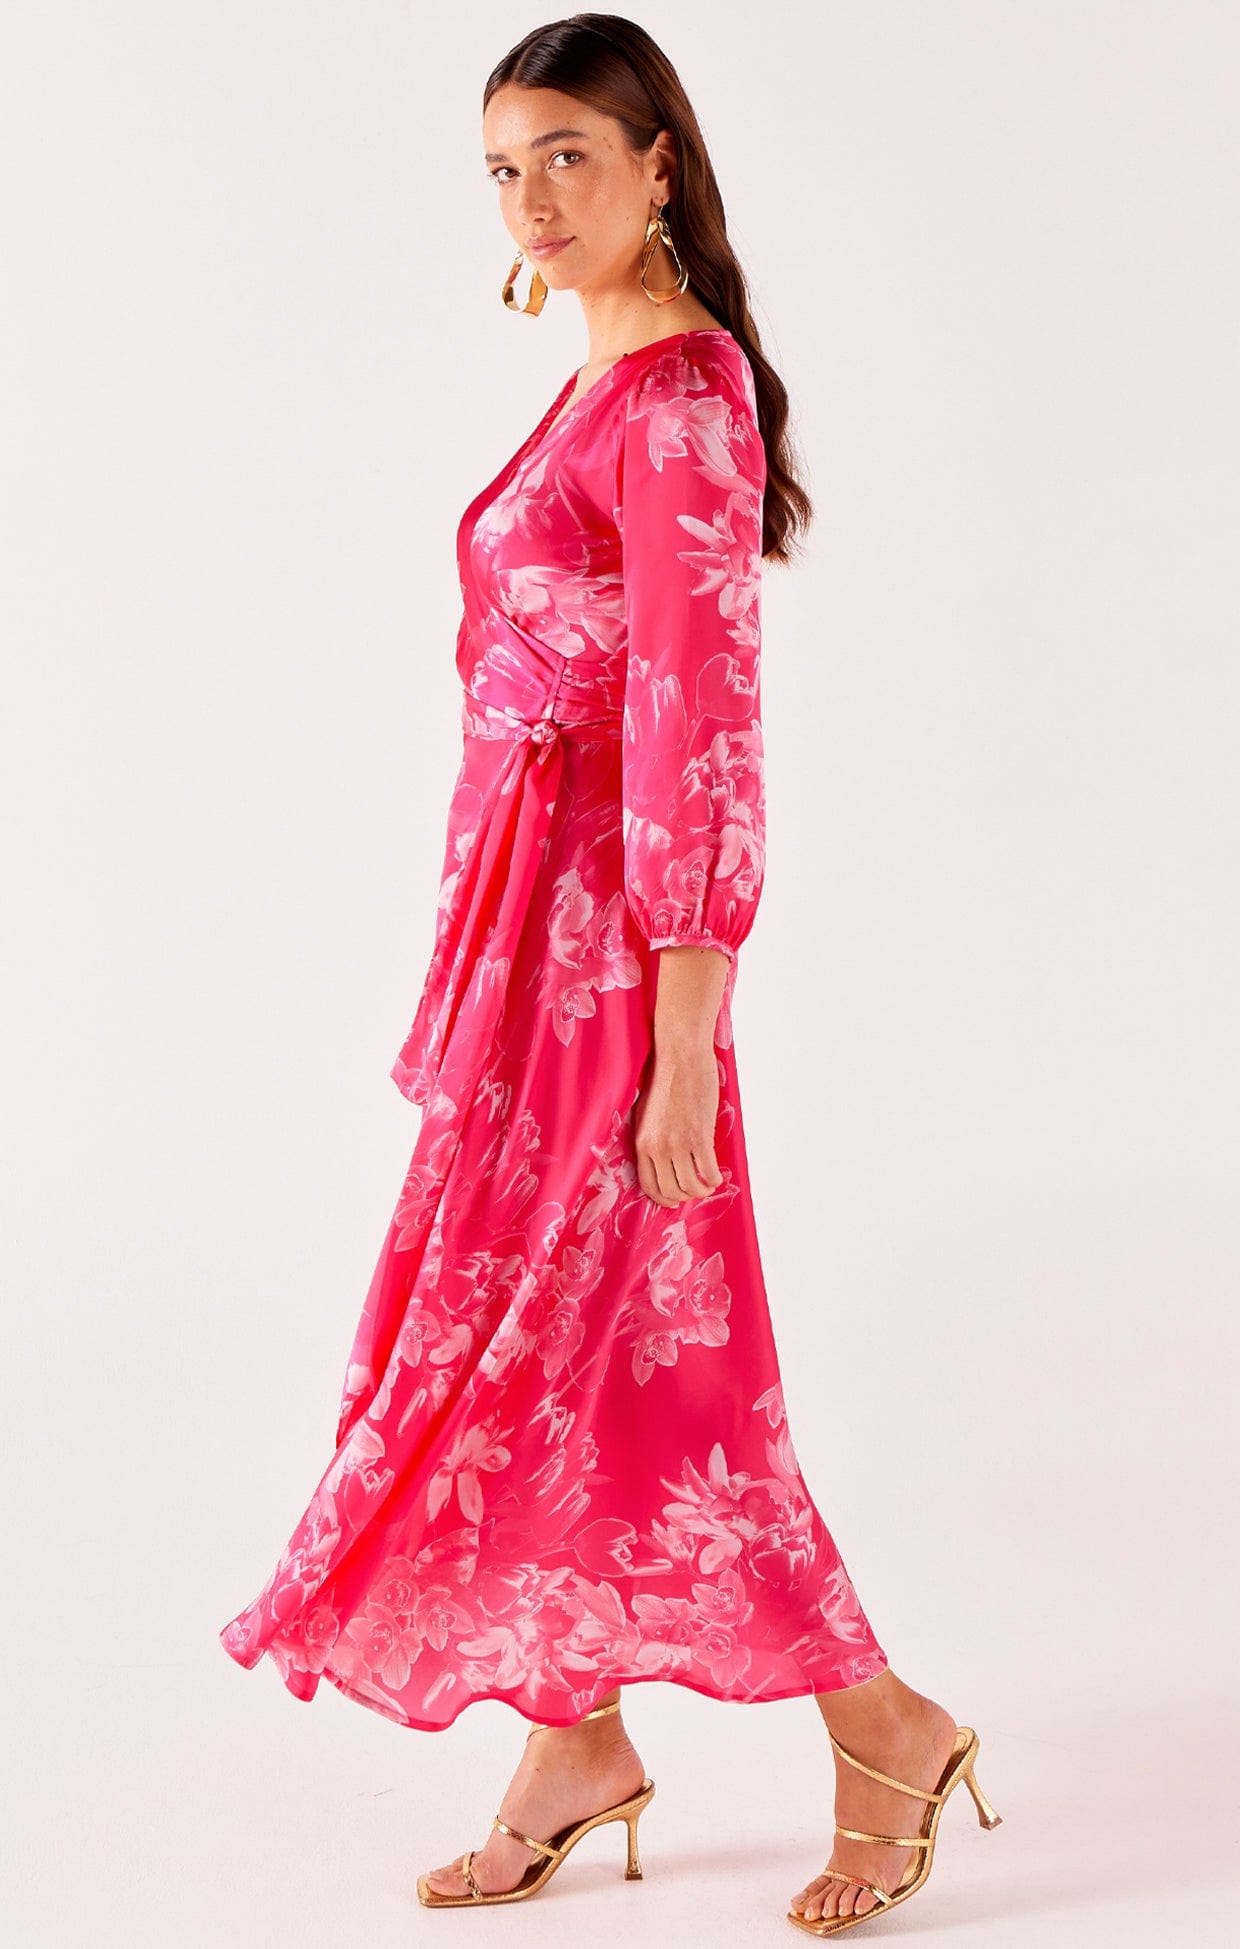 Dresses Events LOTUS FLOWER WRAP DRESS IN HOT PINK FLORAL